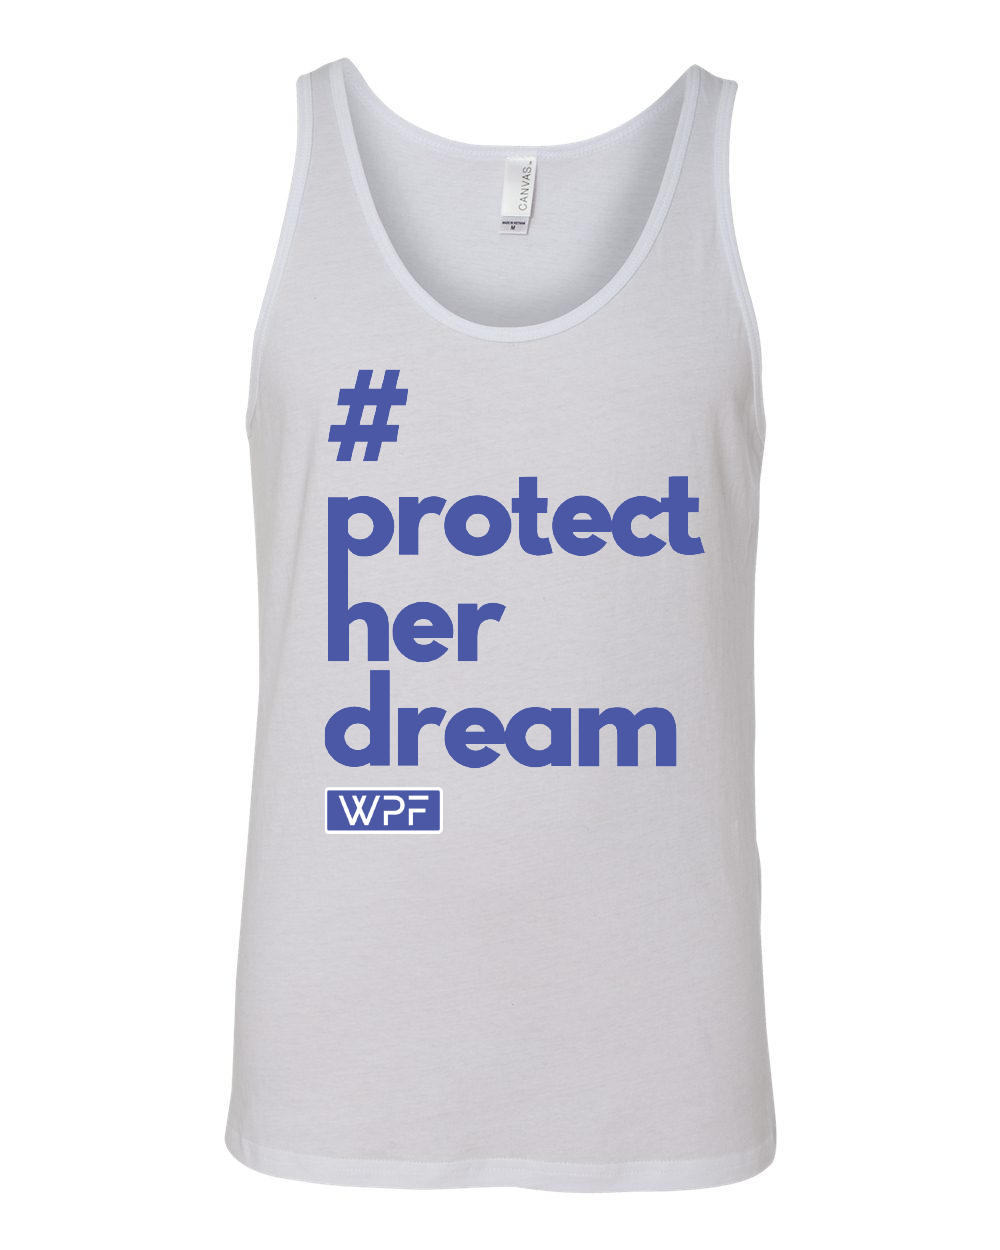 WPF Tank Top - White - Protect Her Dream